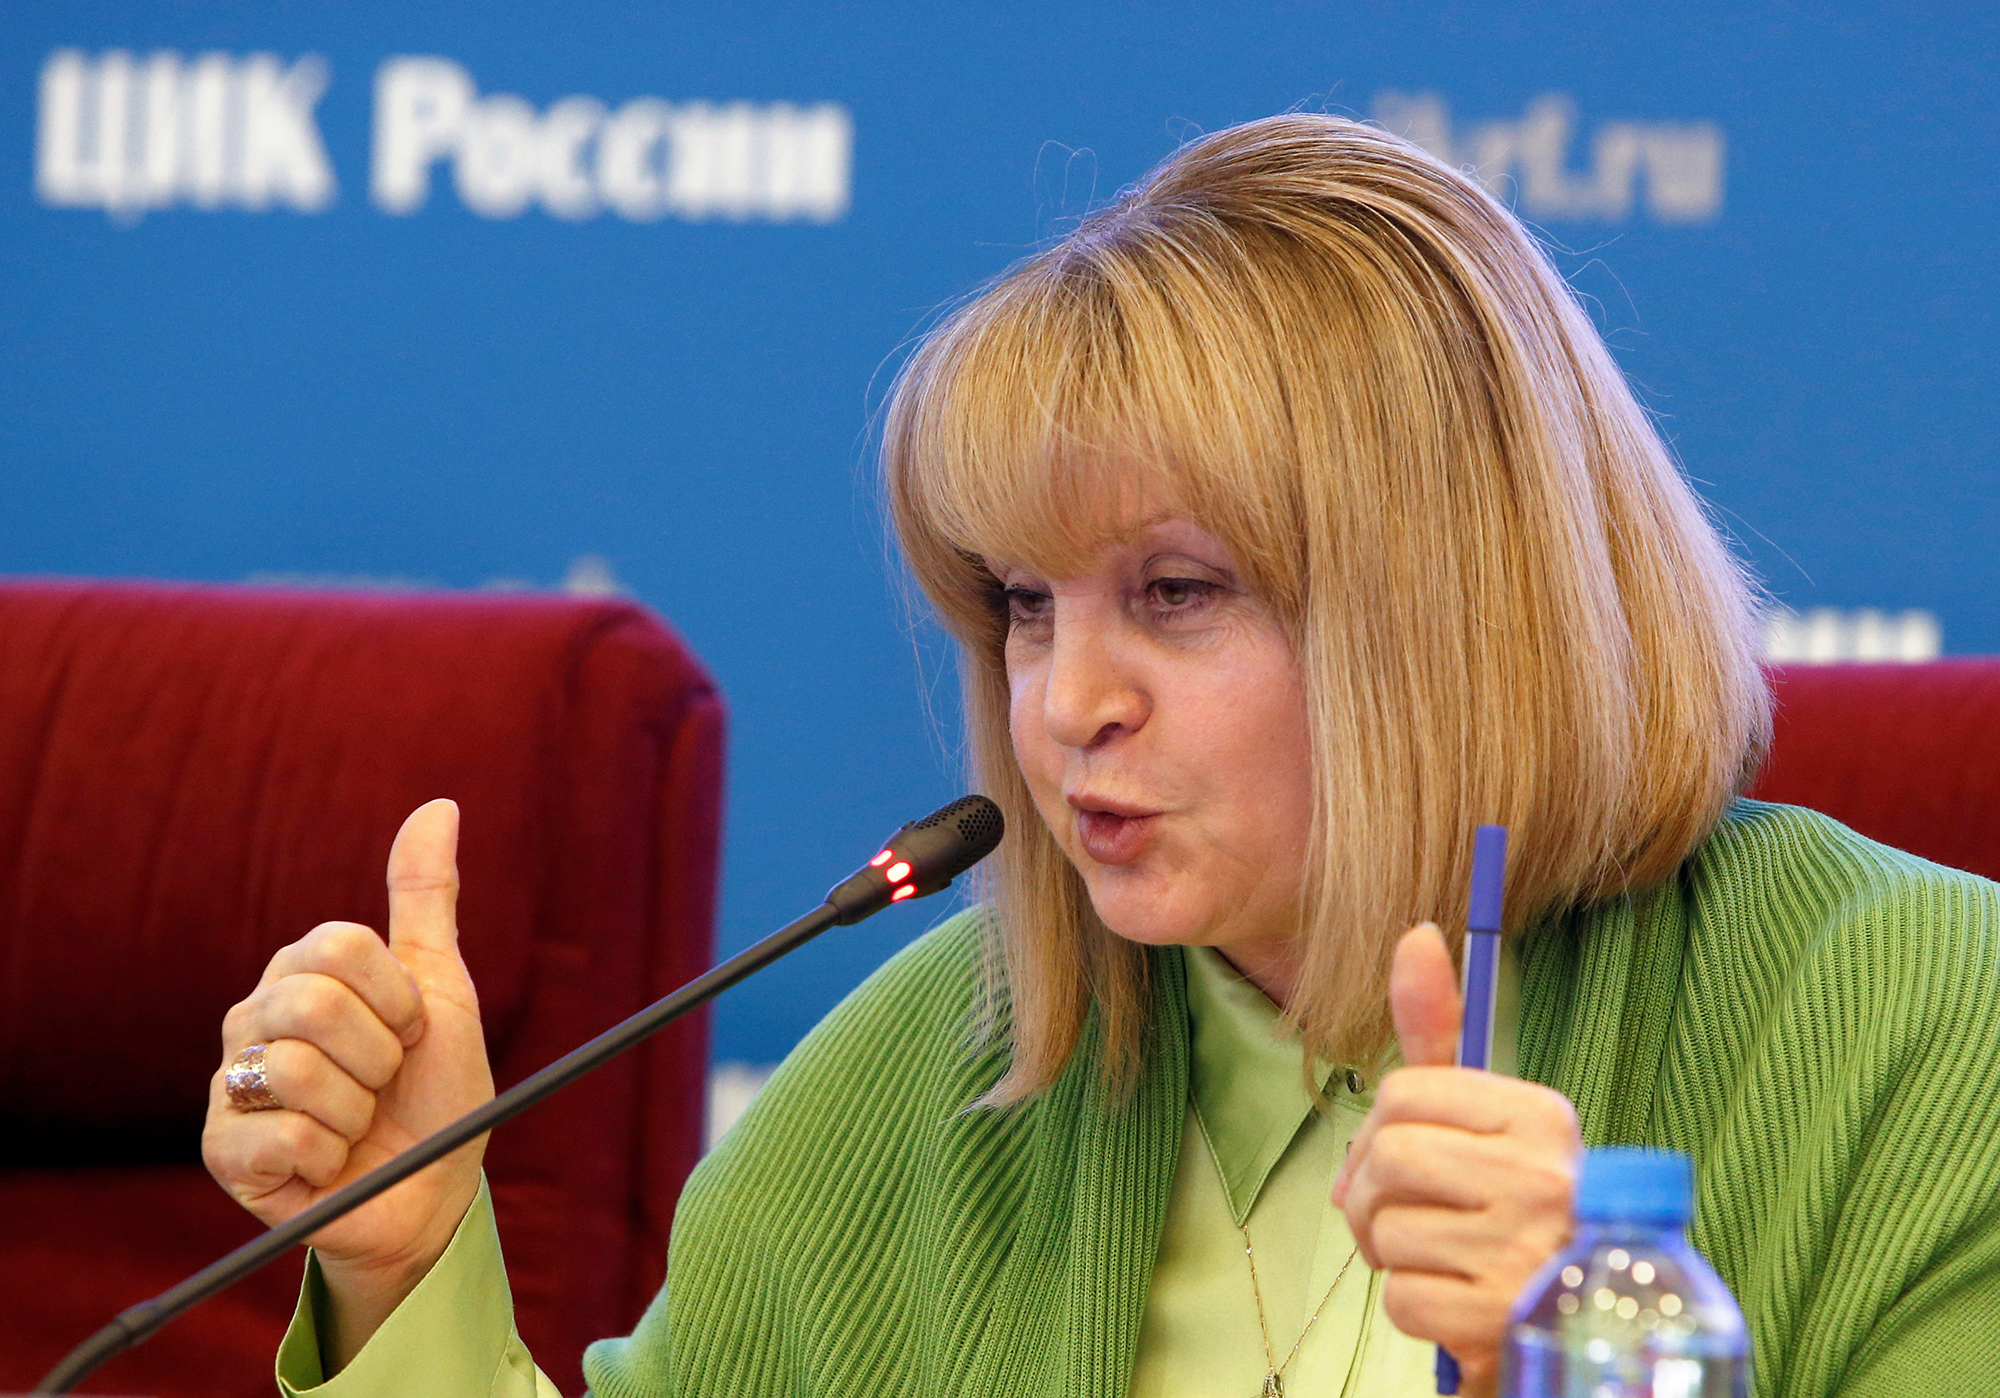 Head of Russia's Central Election Commission Ella Pamfilova gestures during a news conference on the preliminary results of a parliamentary election in Moscow, Russia, September 18, 2016. REUTERS/Sergei Karpukhin